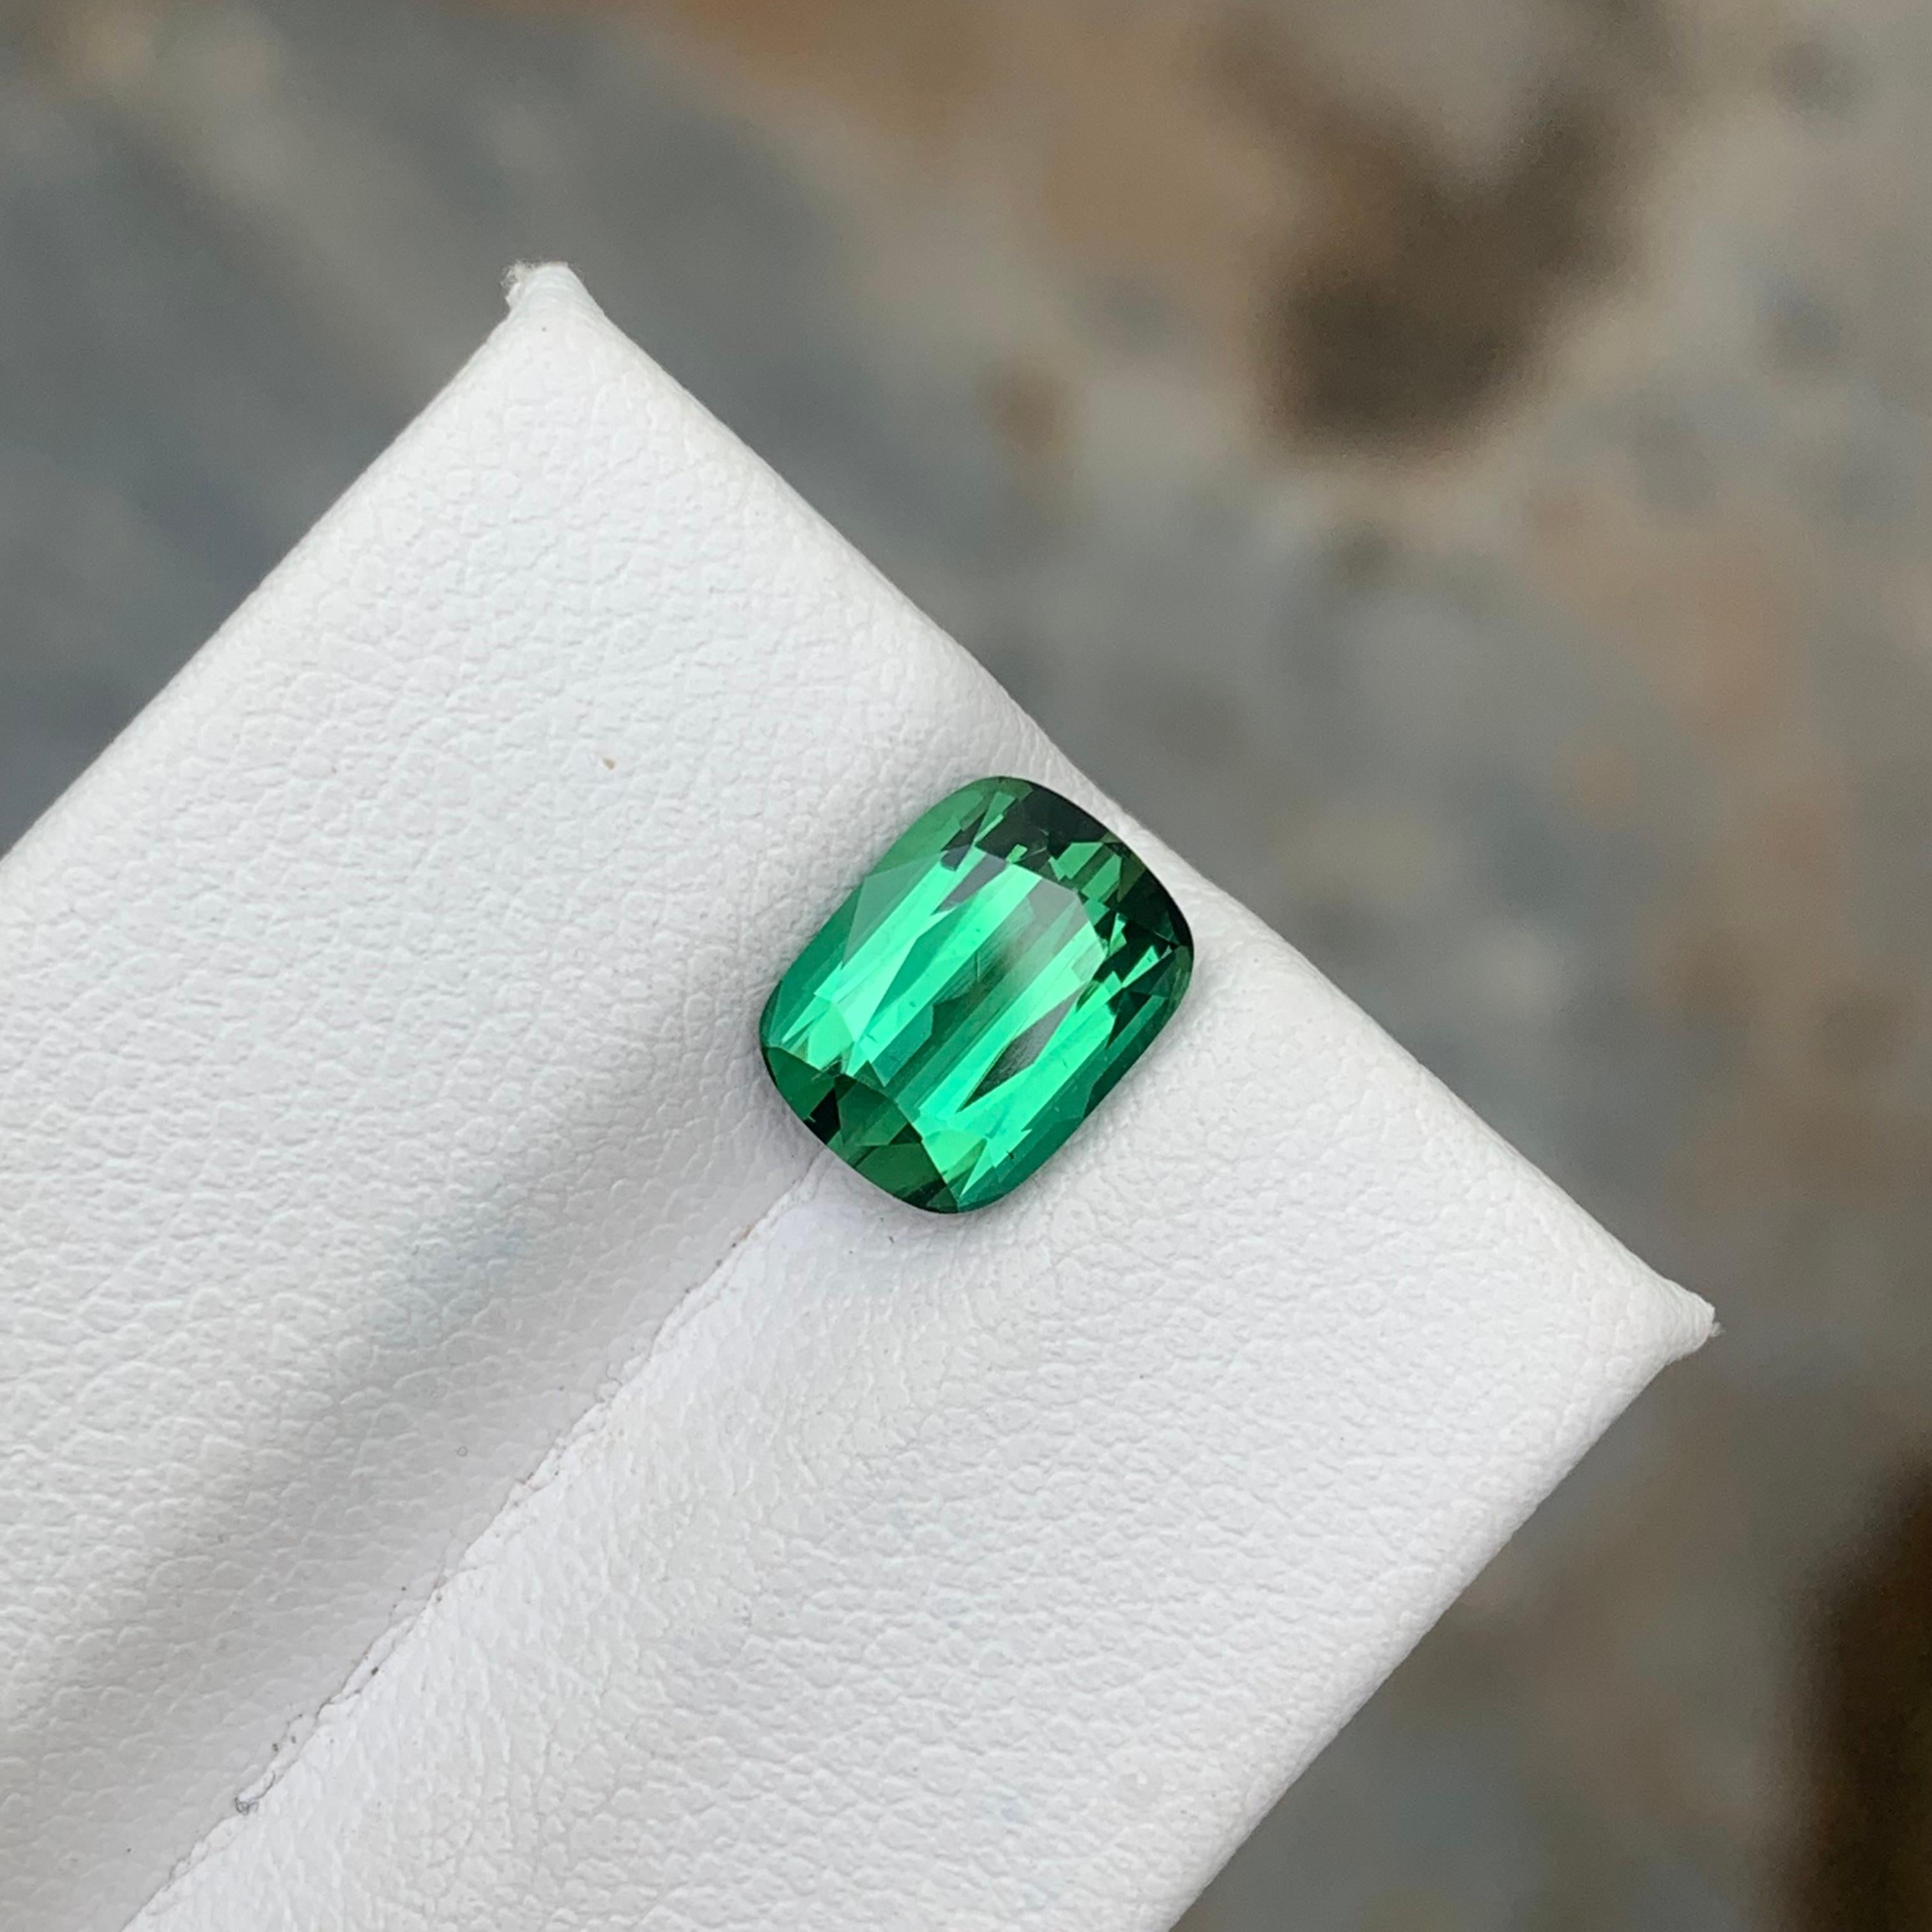 Gemstone Type : Tourmaline
Weight : 2.65 Carats
Dimensions : 9x7x5.1 Mm
Origin : Kunar Afghanistan
Clarity : Eye Clean
Shape: Cushion
Color: Lagoonish Green
Certificate: On Demand
Basically, mint tourmalines are tourmalines with pastel hues of light